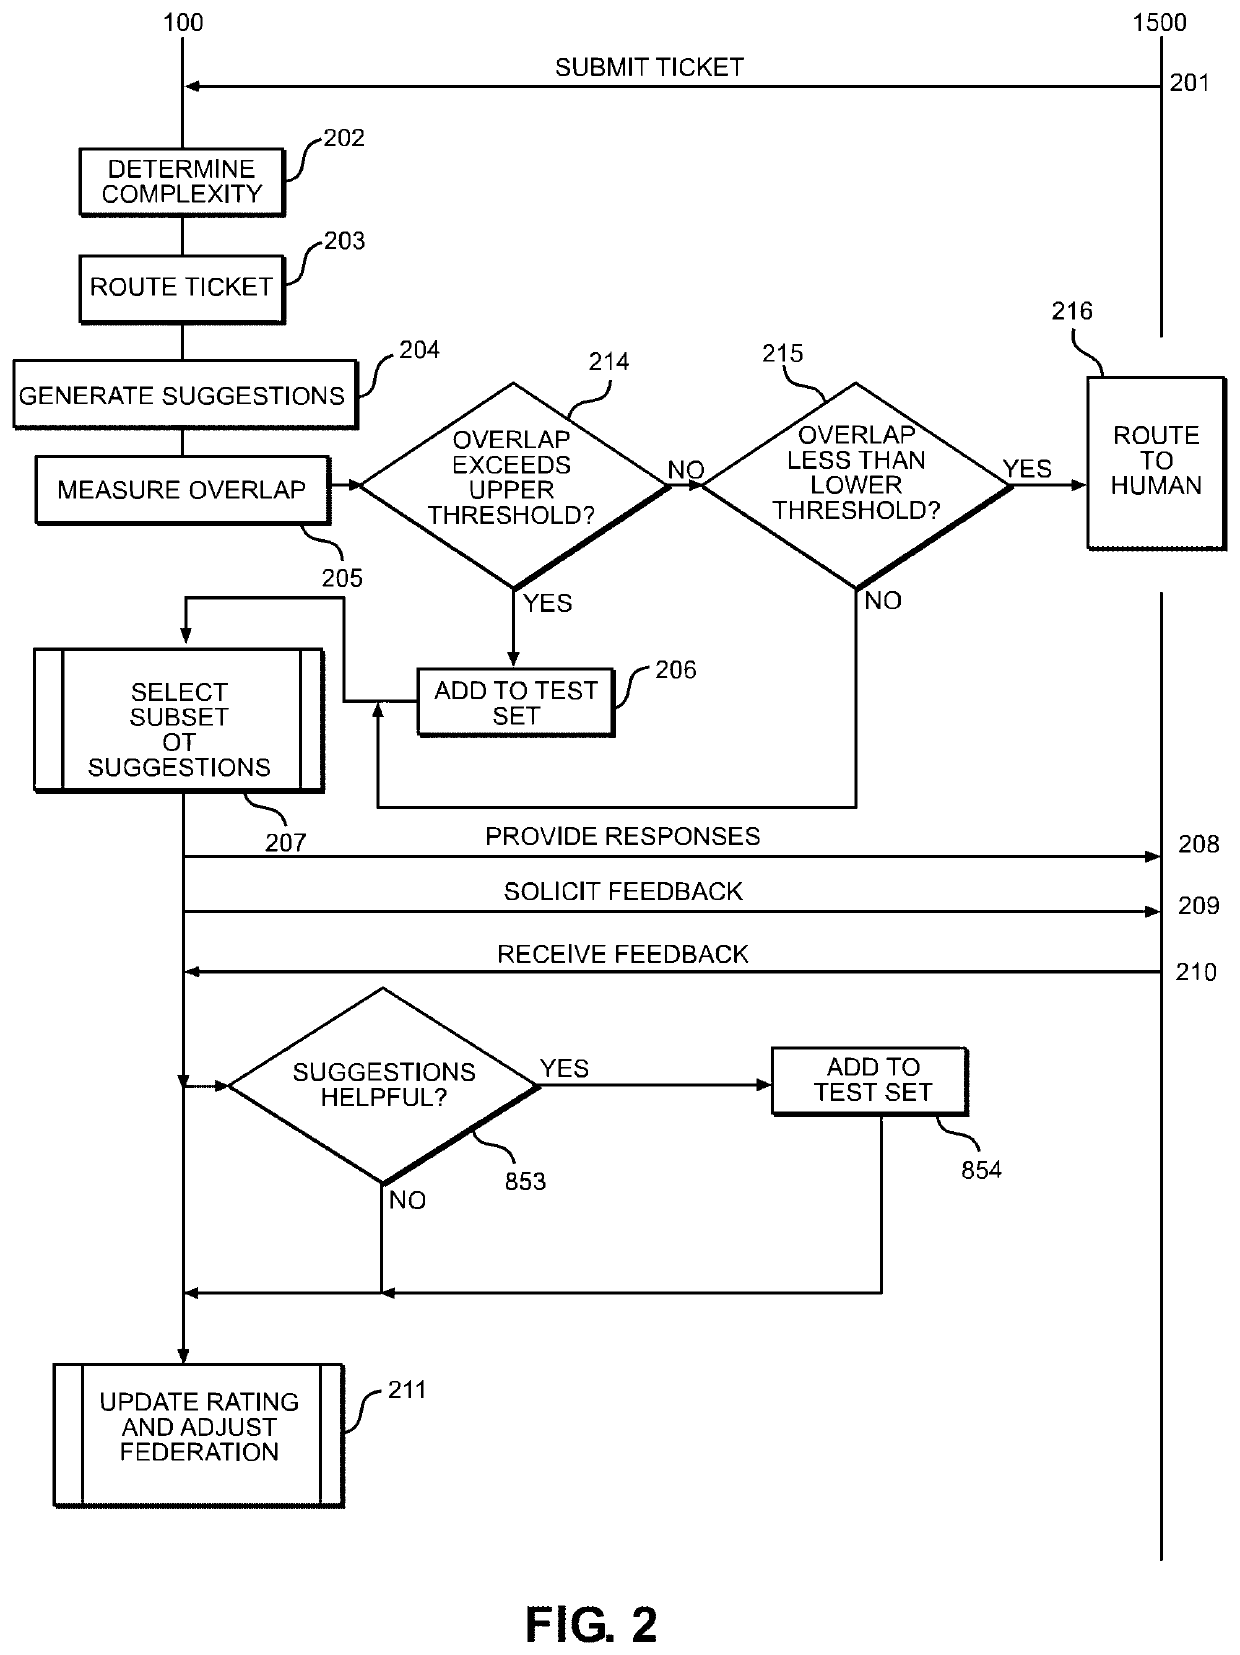 Systems, methods, and computer readable mediums for controlling a federation of automated agents